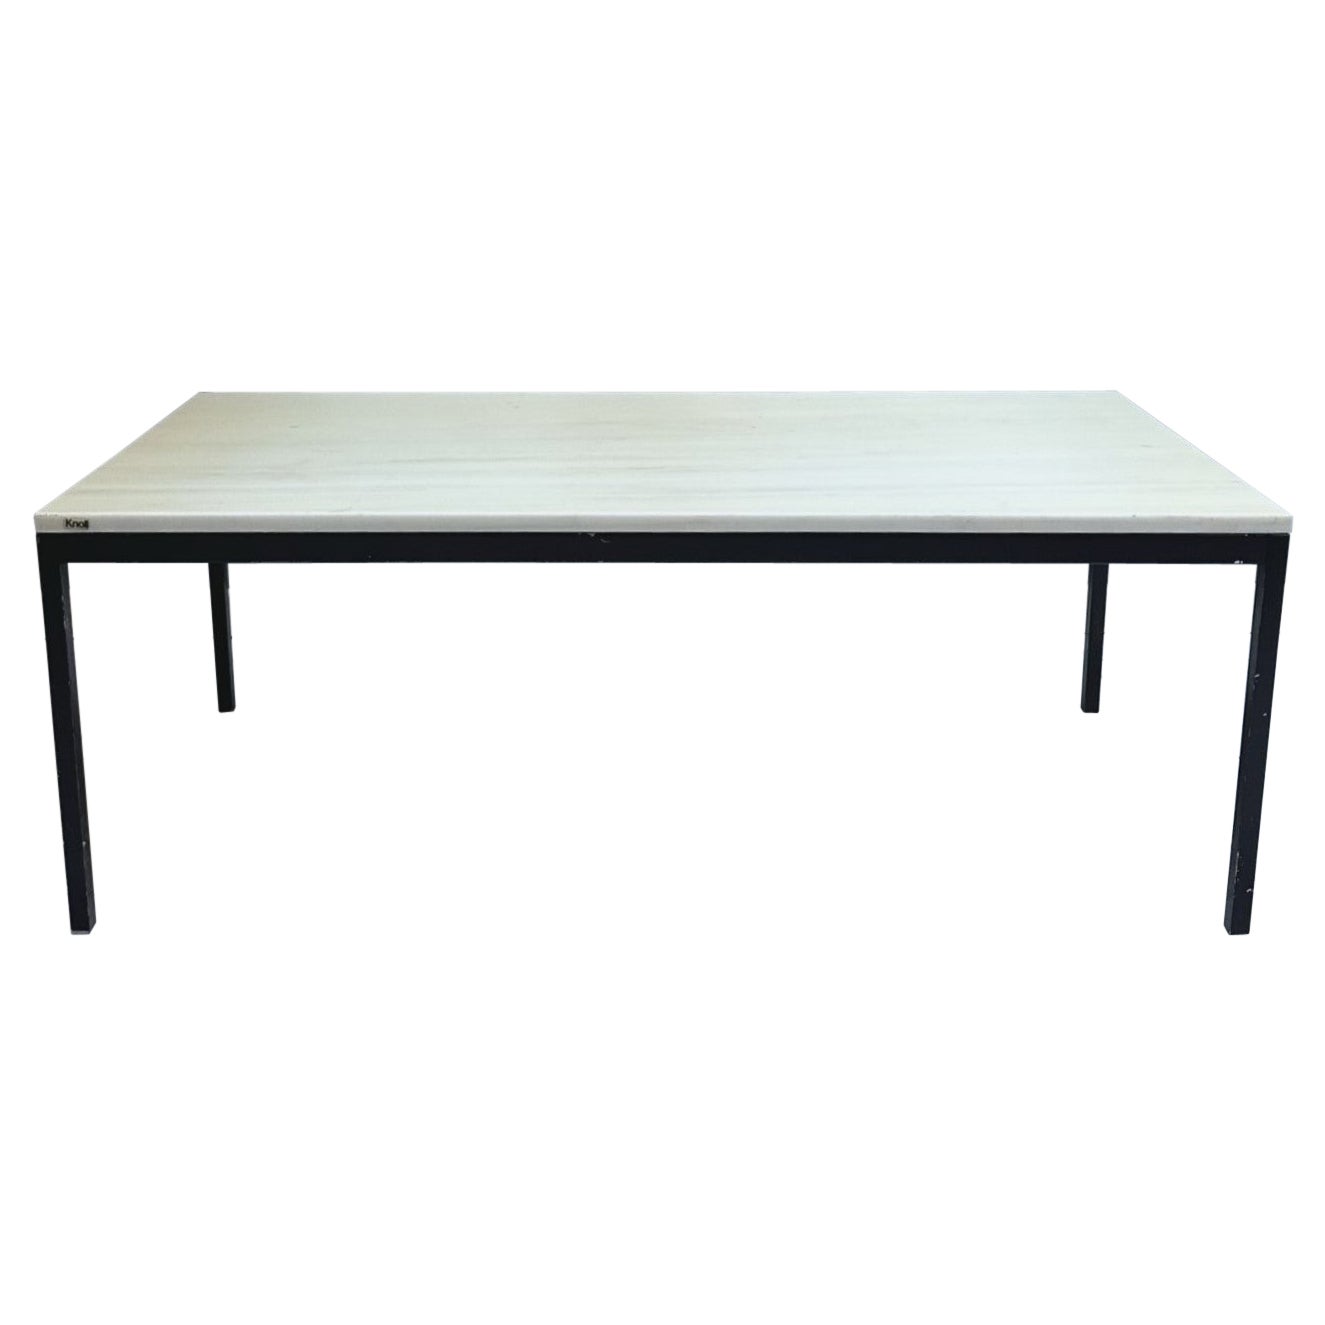 1970 Coffee Table by Knoll Iternational, iron black leg with marble top